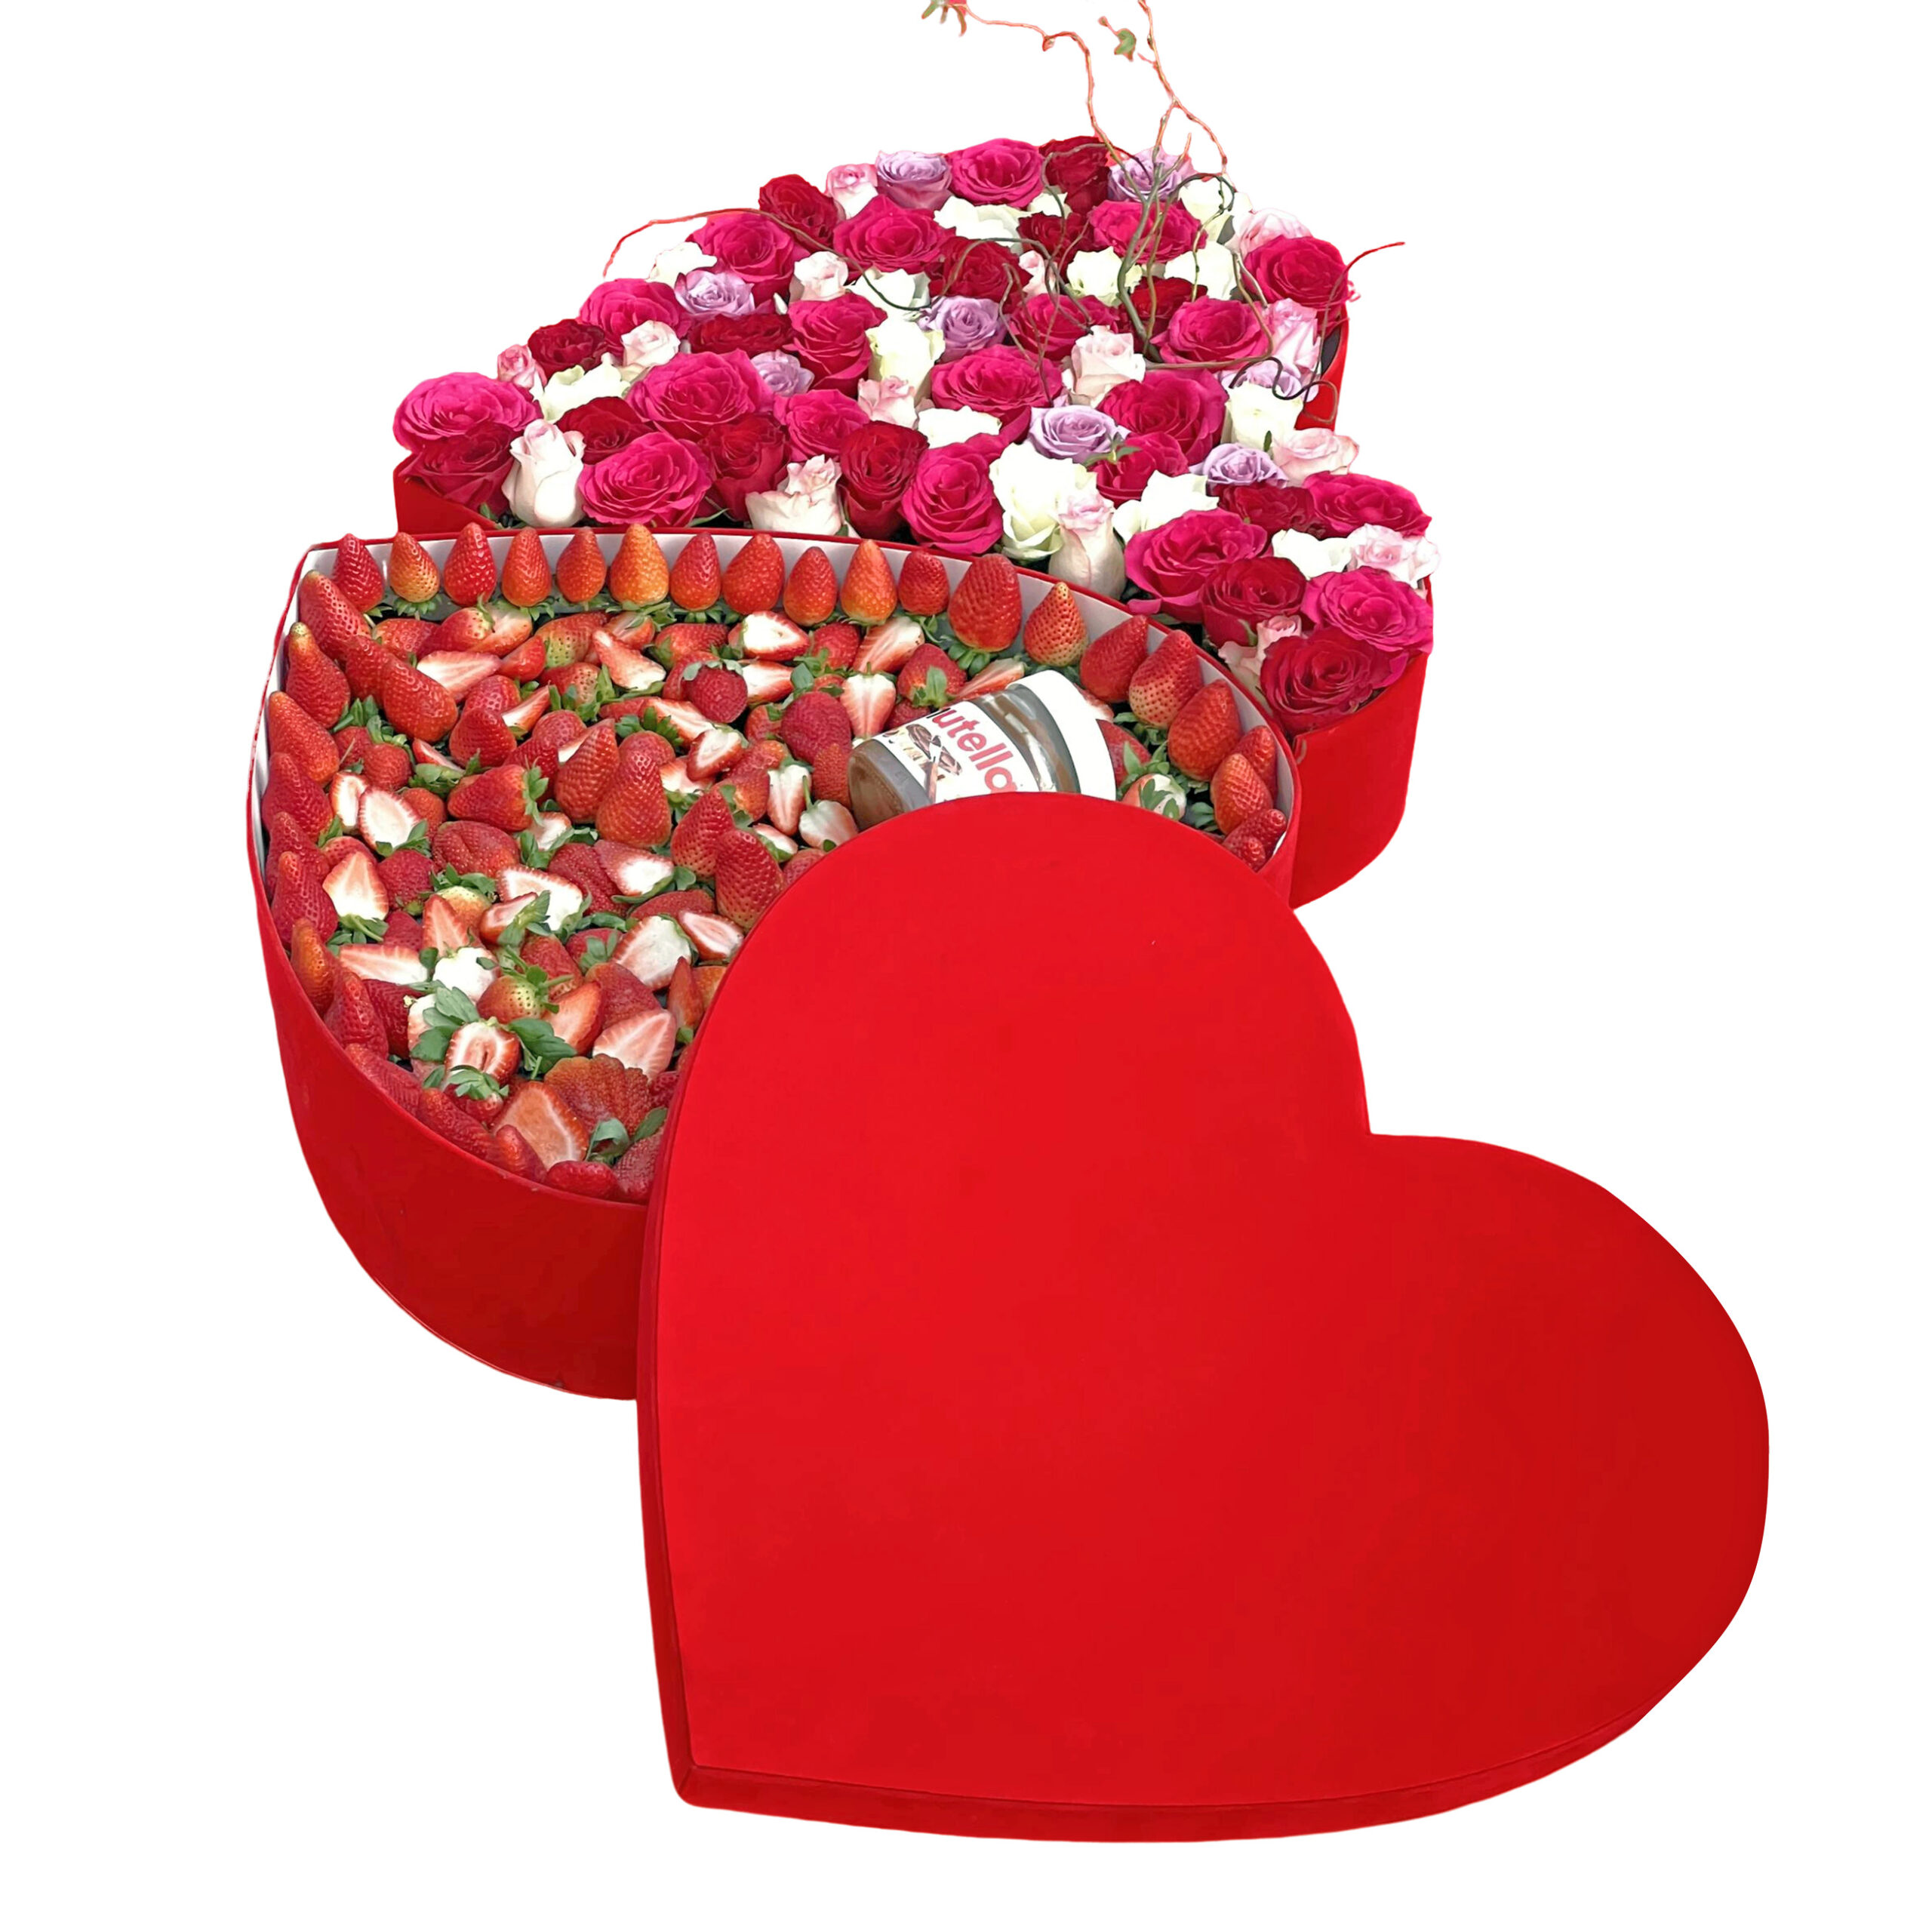 heart box with flowers and roses